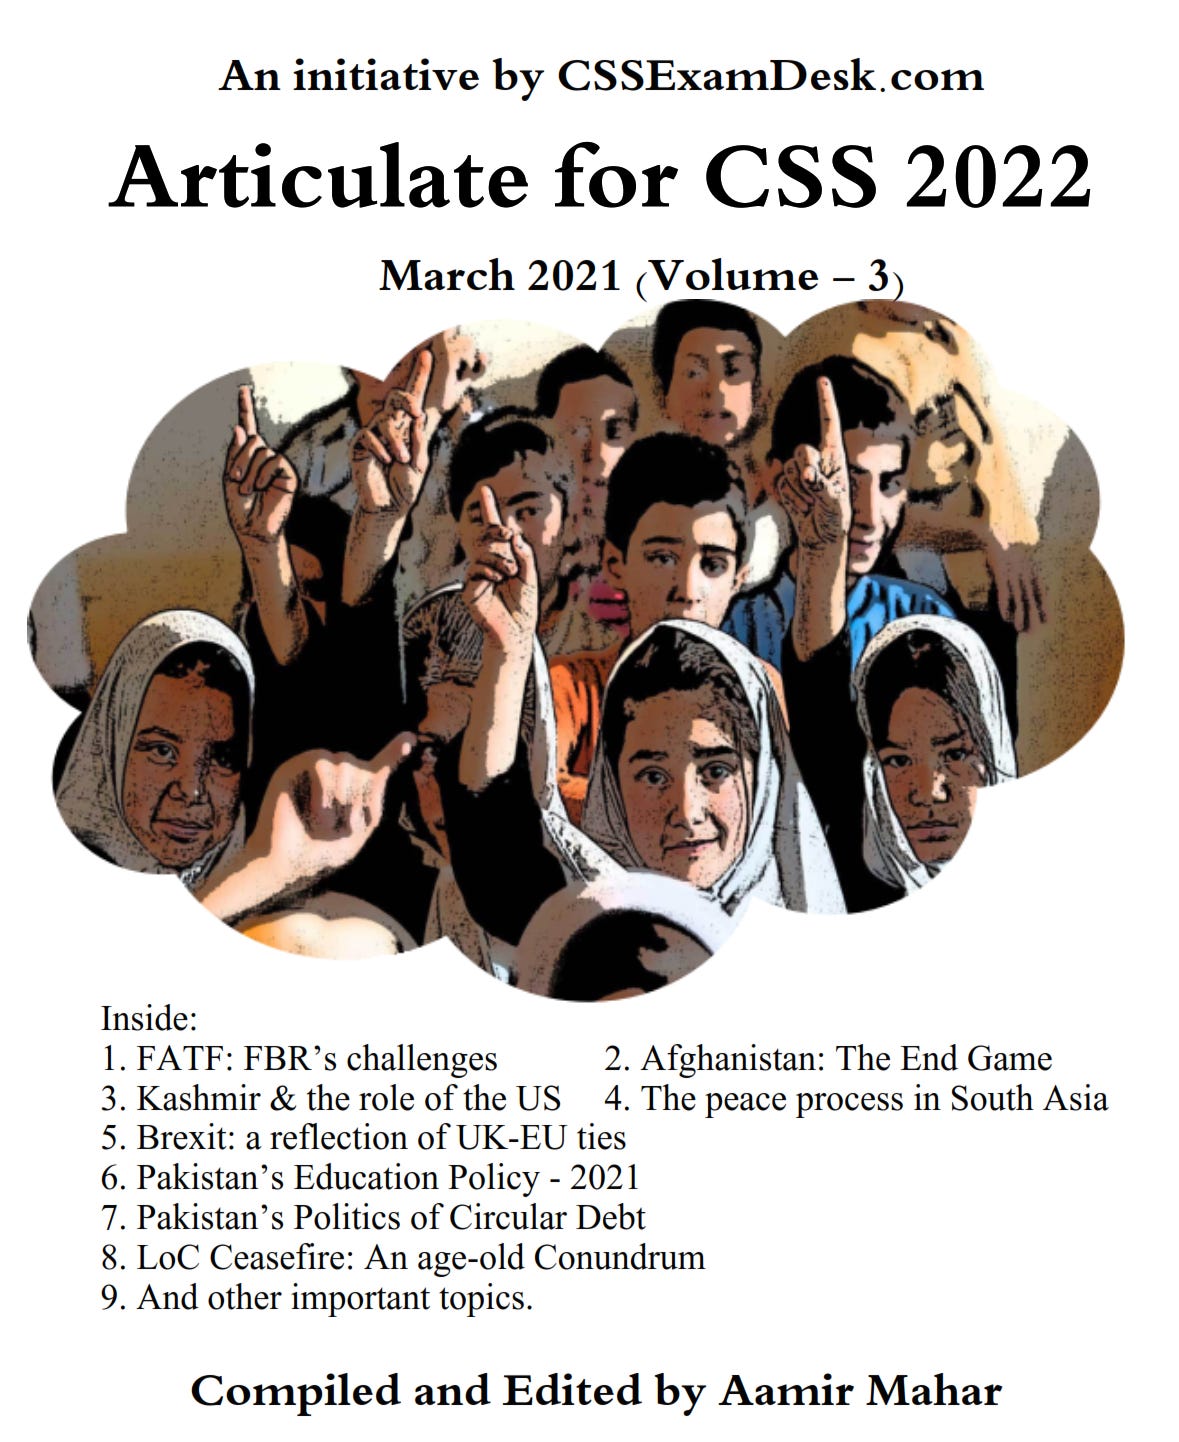 download the new version for android Rapid CSS 2022 17.7.0.248